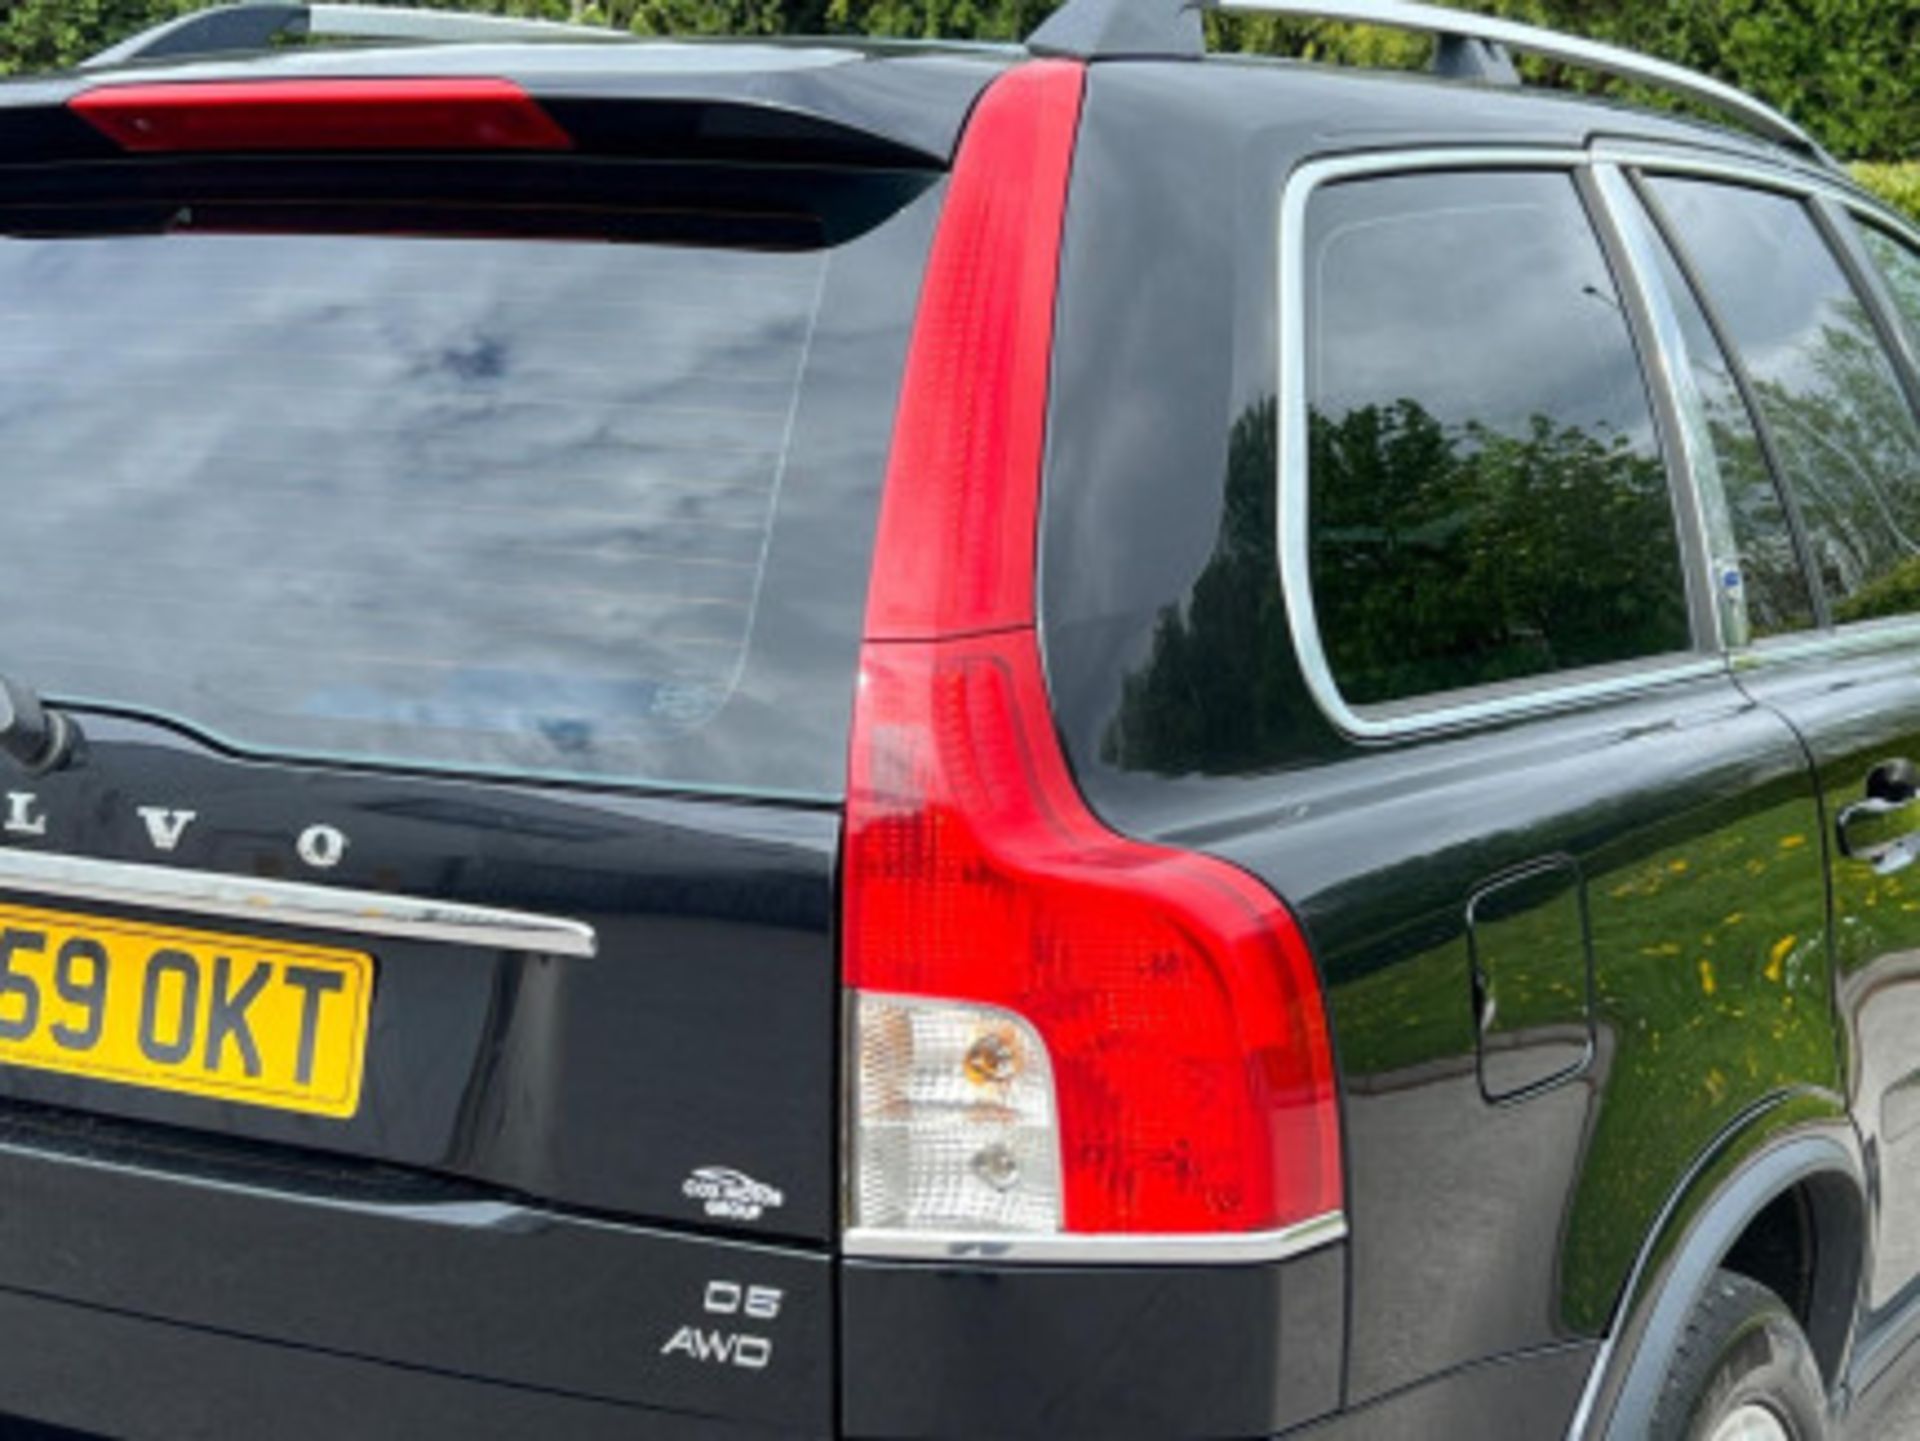 VOLVO XC90 2.4 D5 EXECUTIVE GEARTRONIC AWD, 5DR >>--NO VAT ON HAMMER--<< - Image 53 of 136